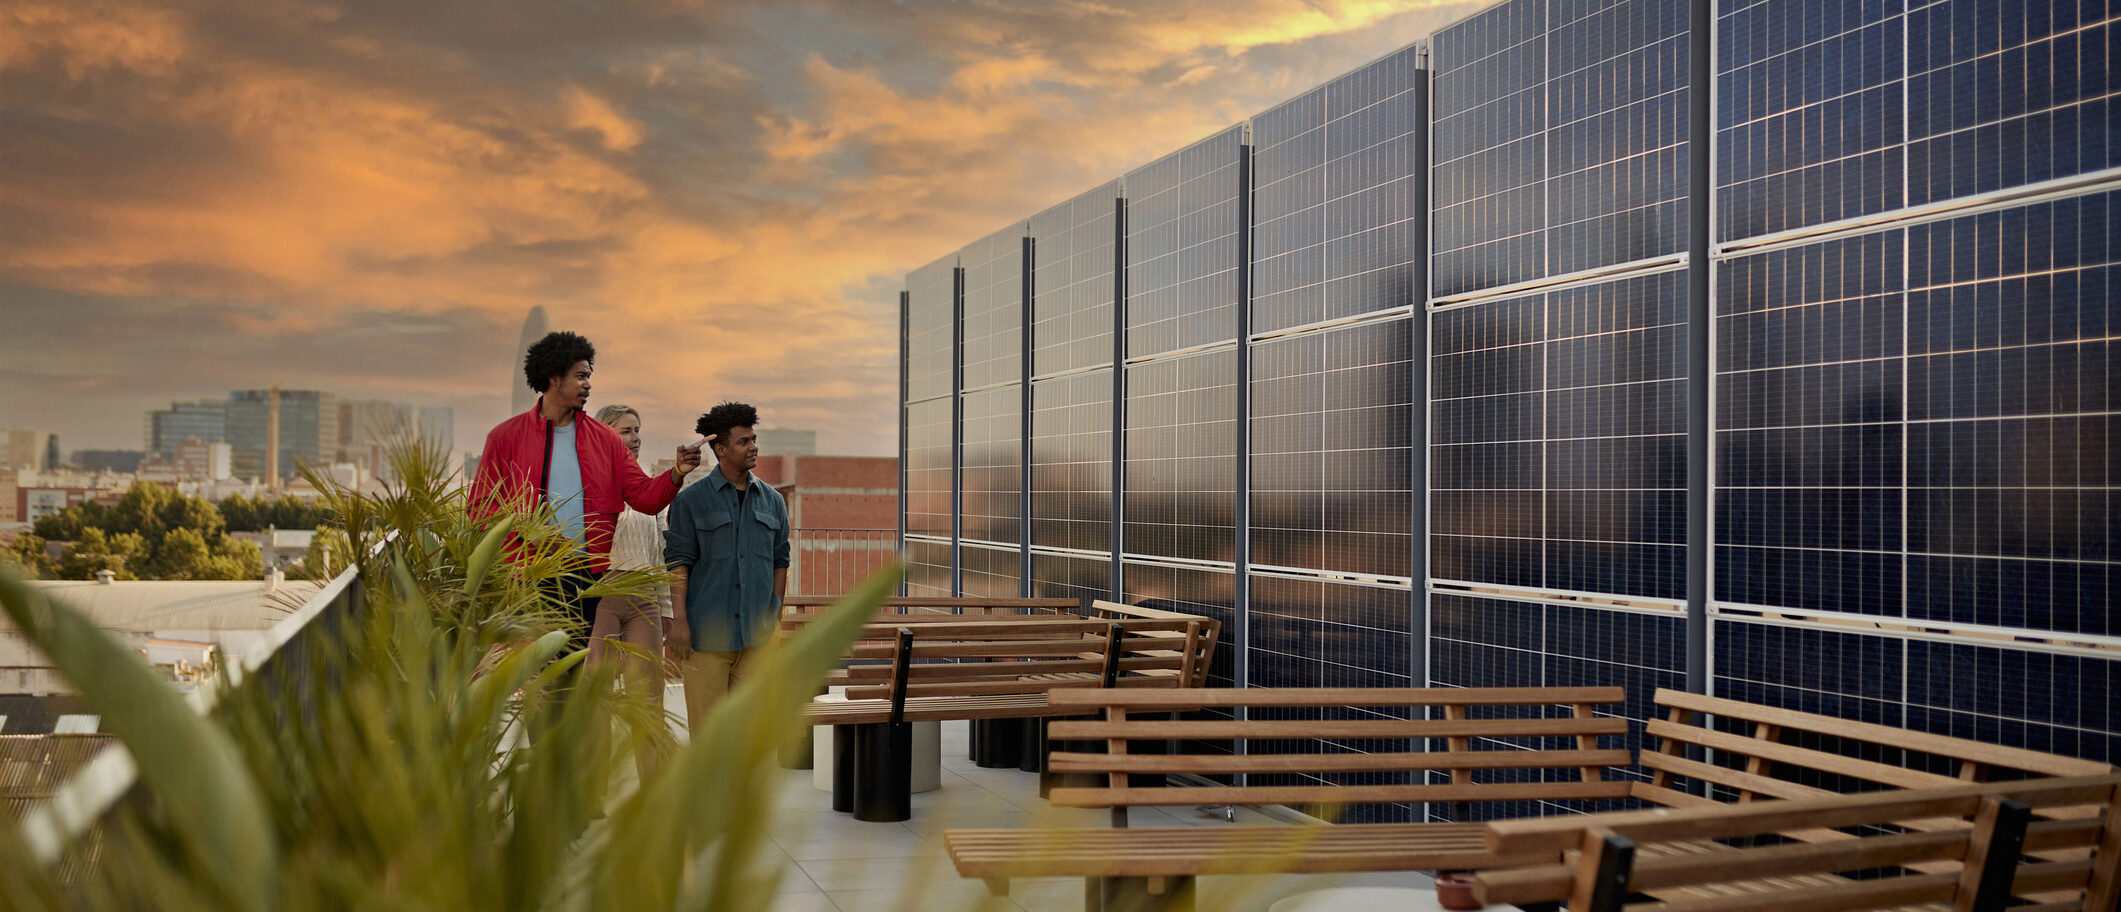 Friends discuss ESG investing on a rooftop with solar panels.